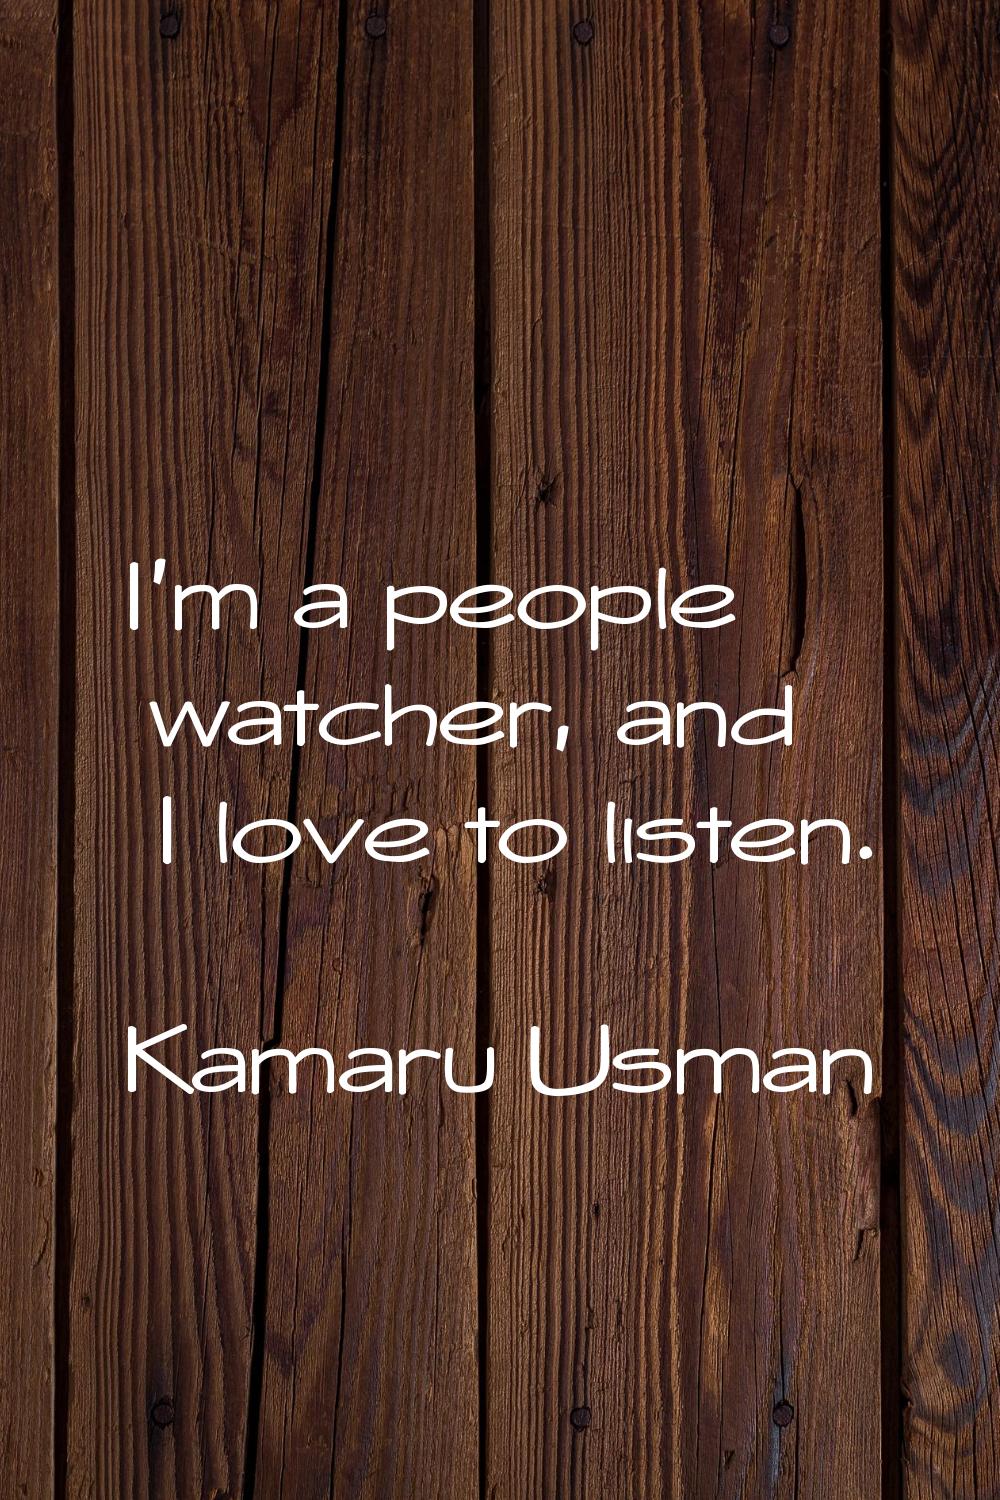 I'm a people watcher, and I love to listen.